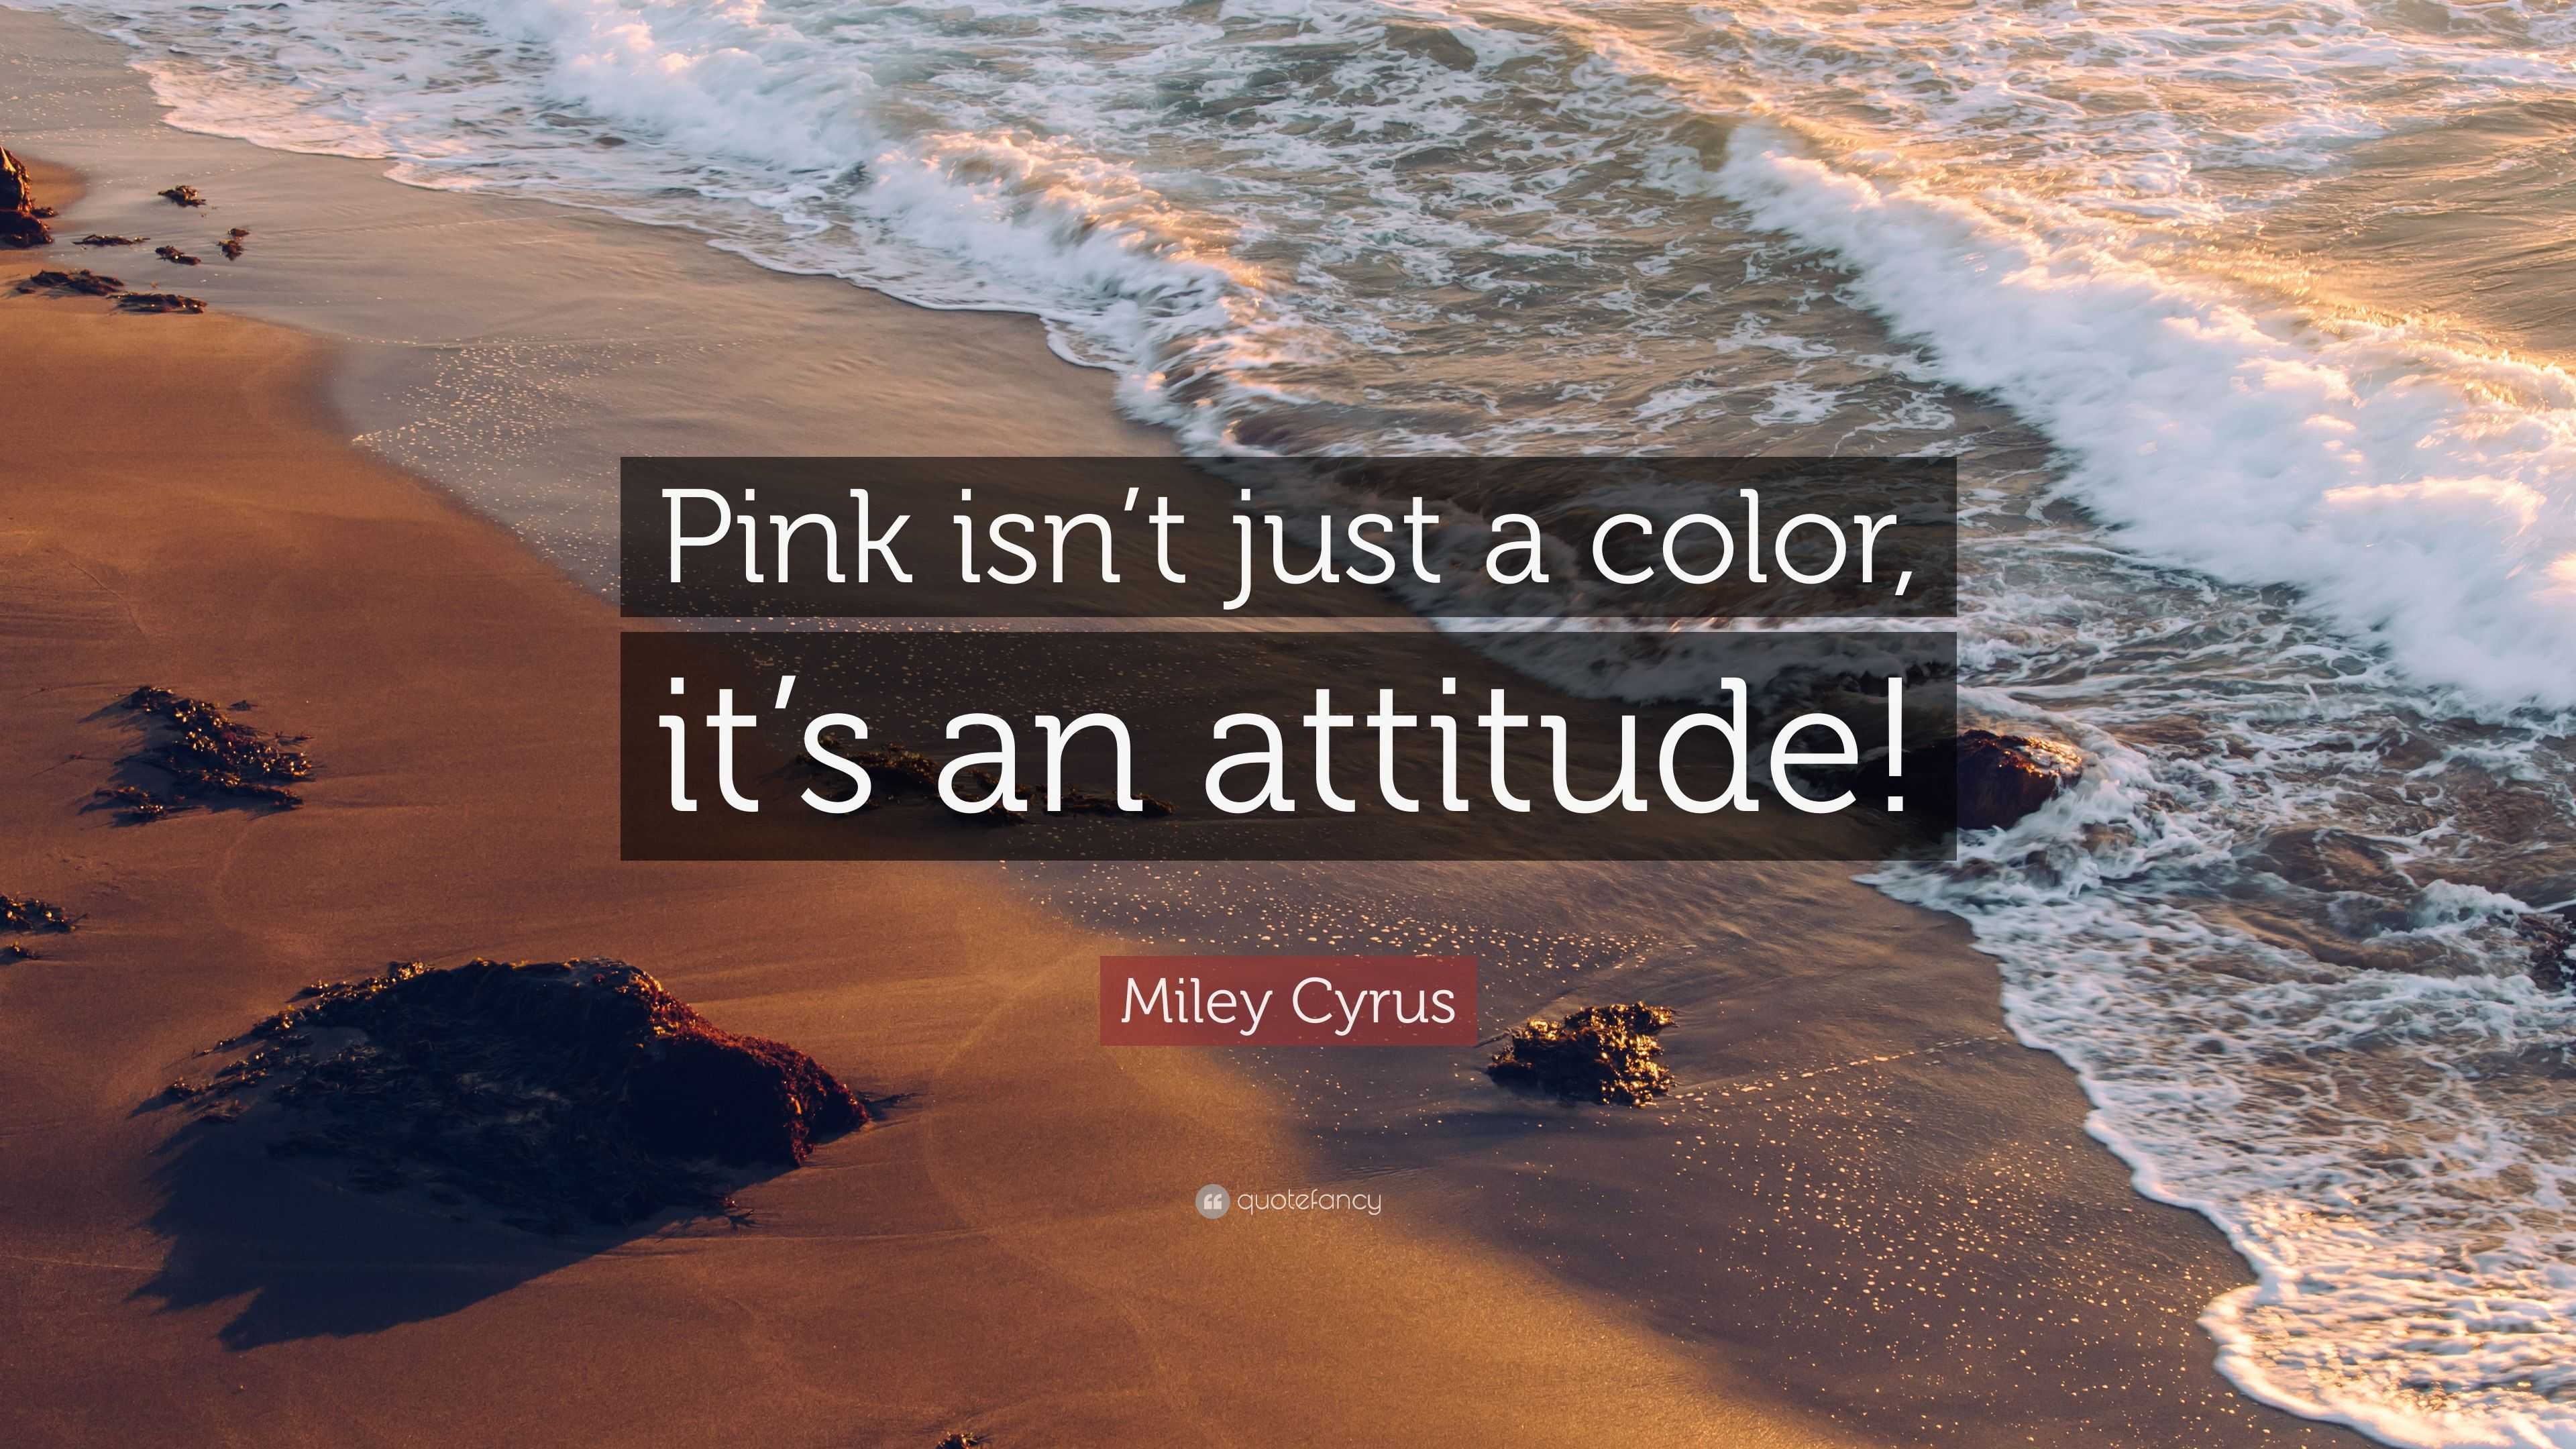 Pink isn't just a color it's an Attitude too!💗